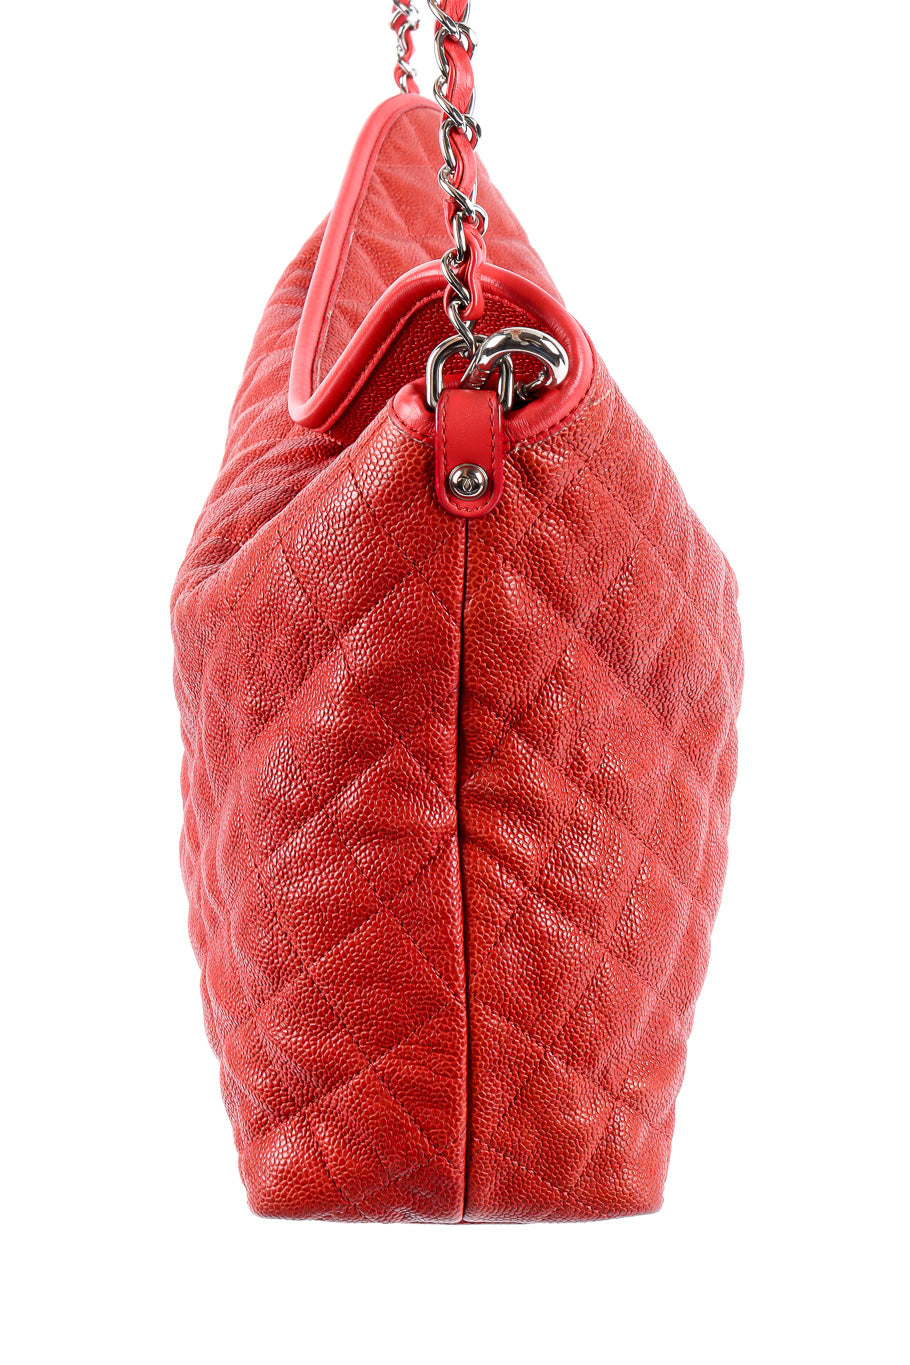 French riviera quilted hobo bag product shot @recessla